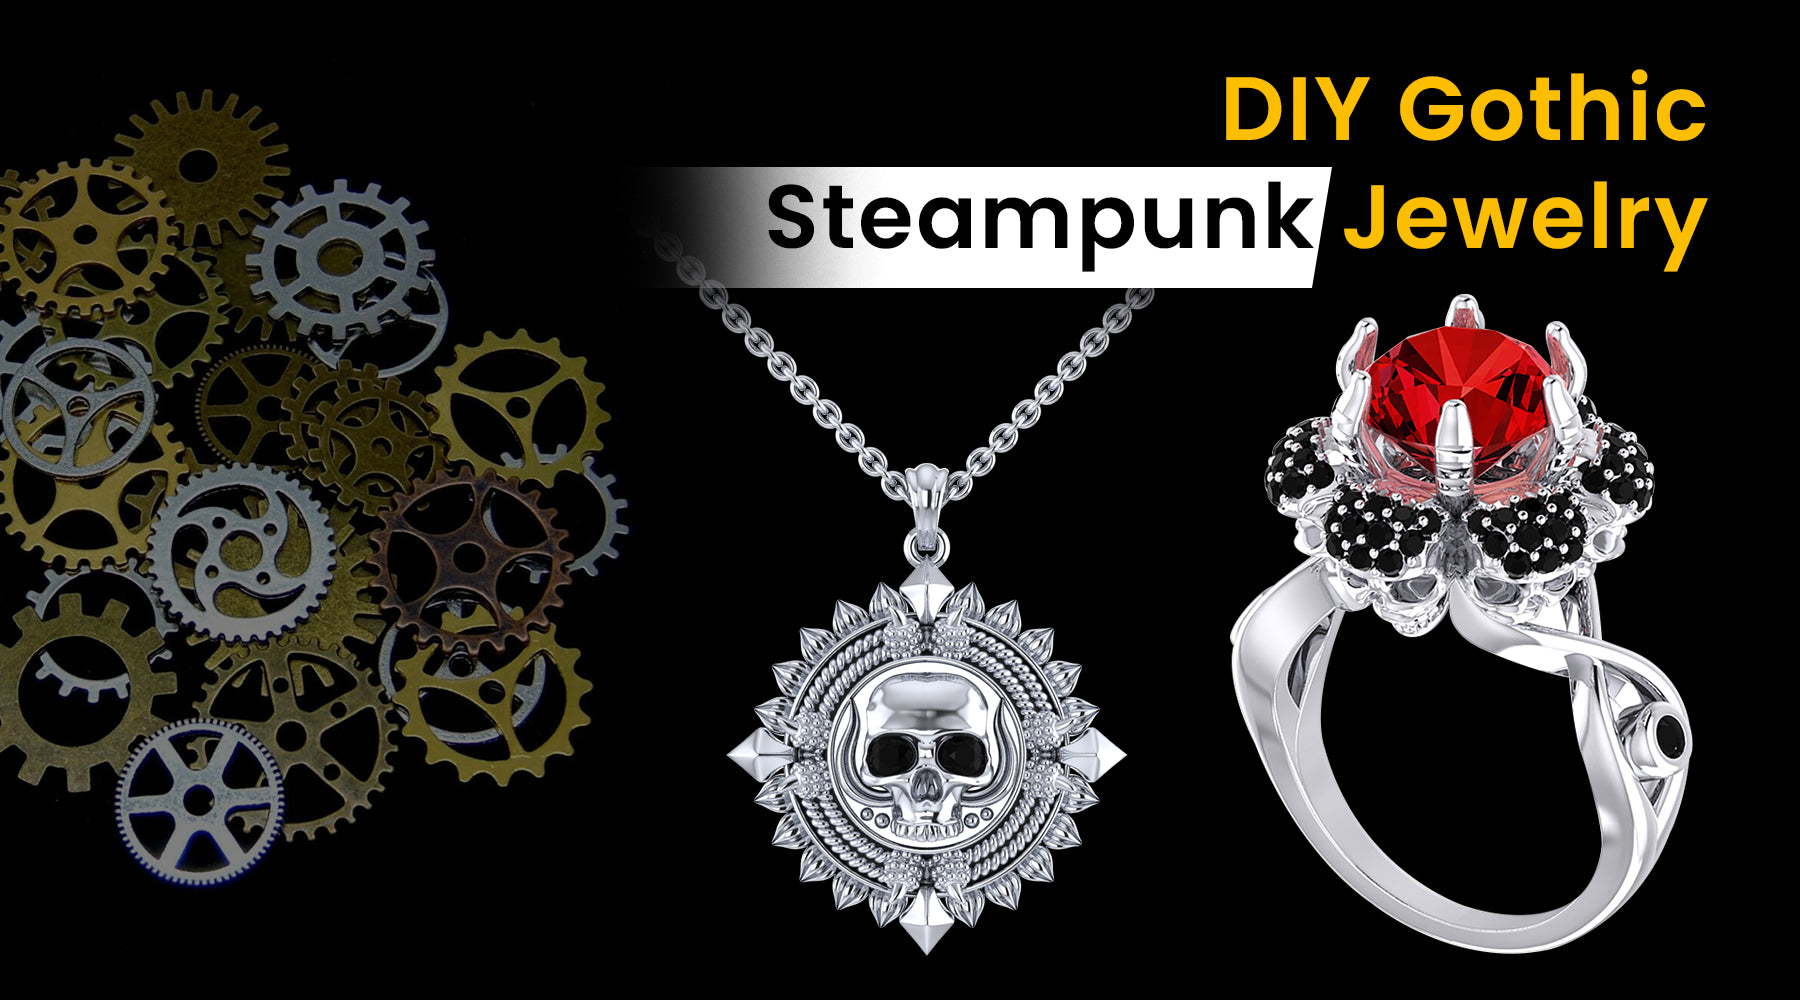 DIY Gothic Steampunk Jewelry with Gears and Cogs